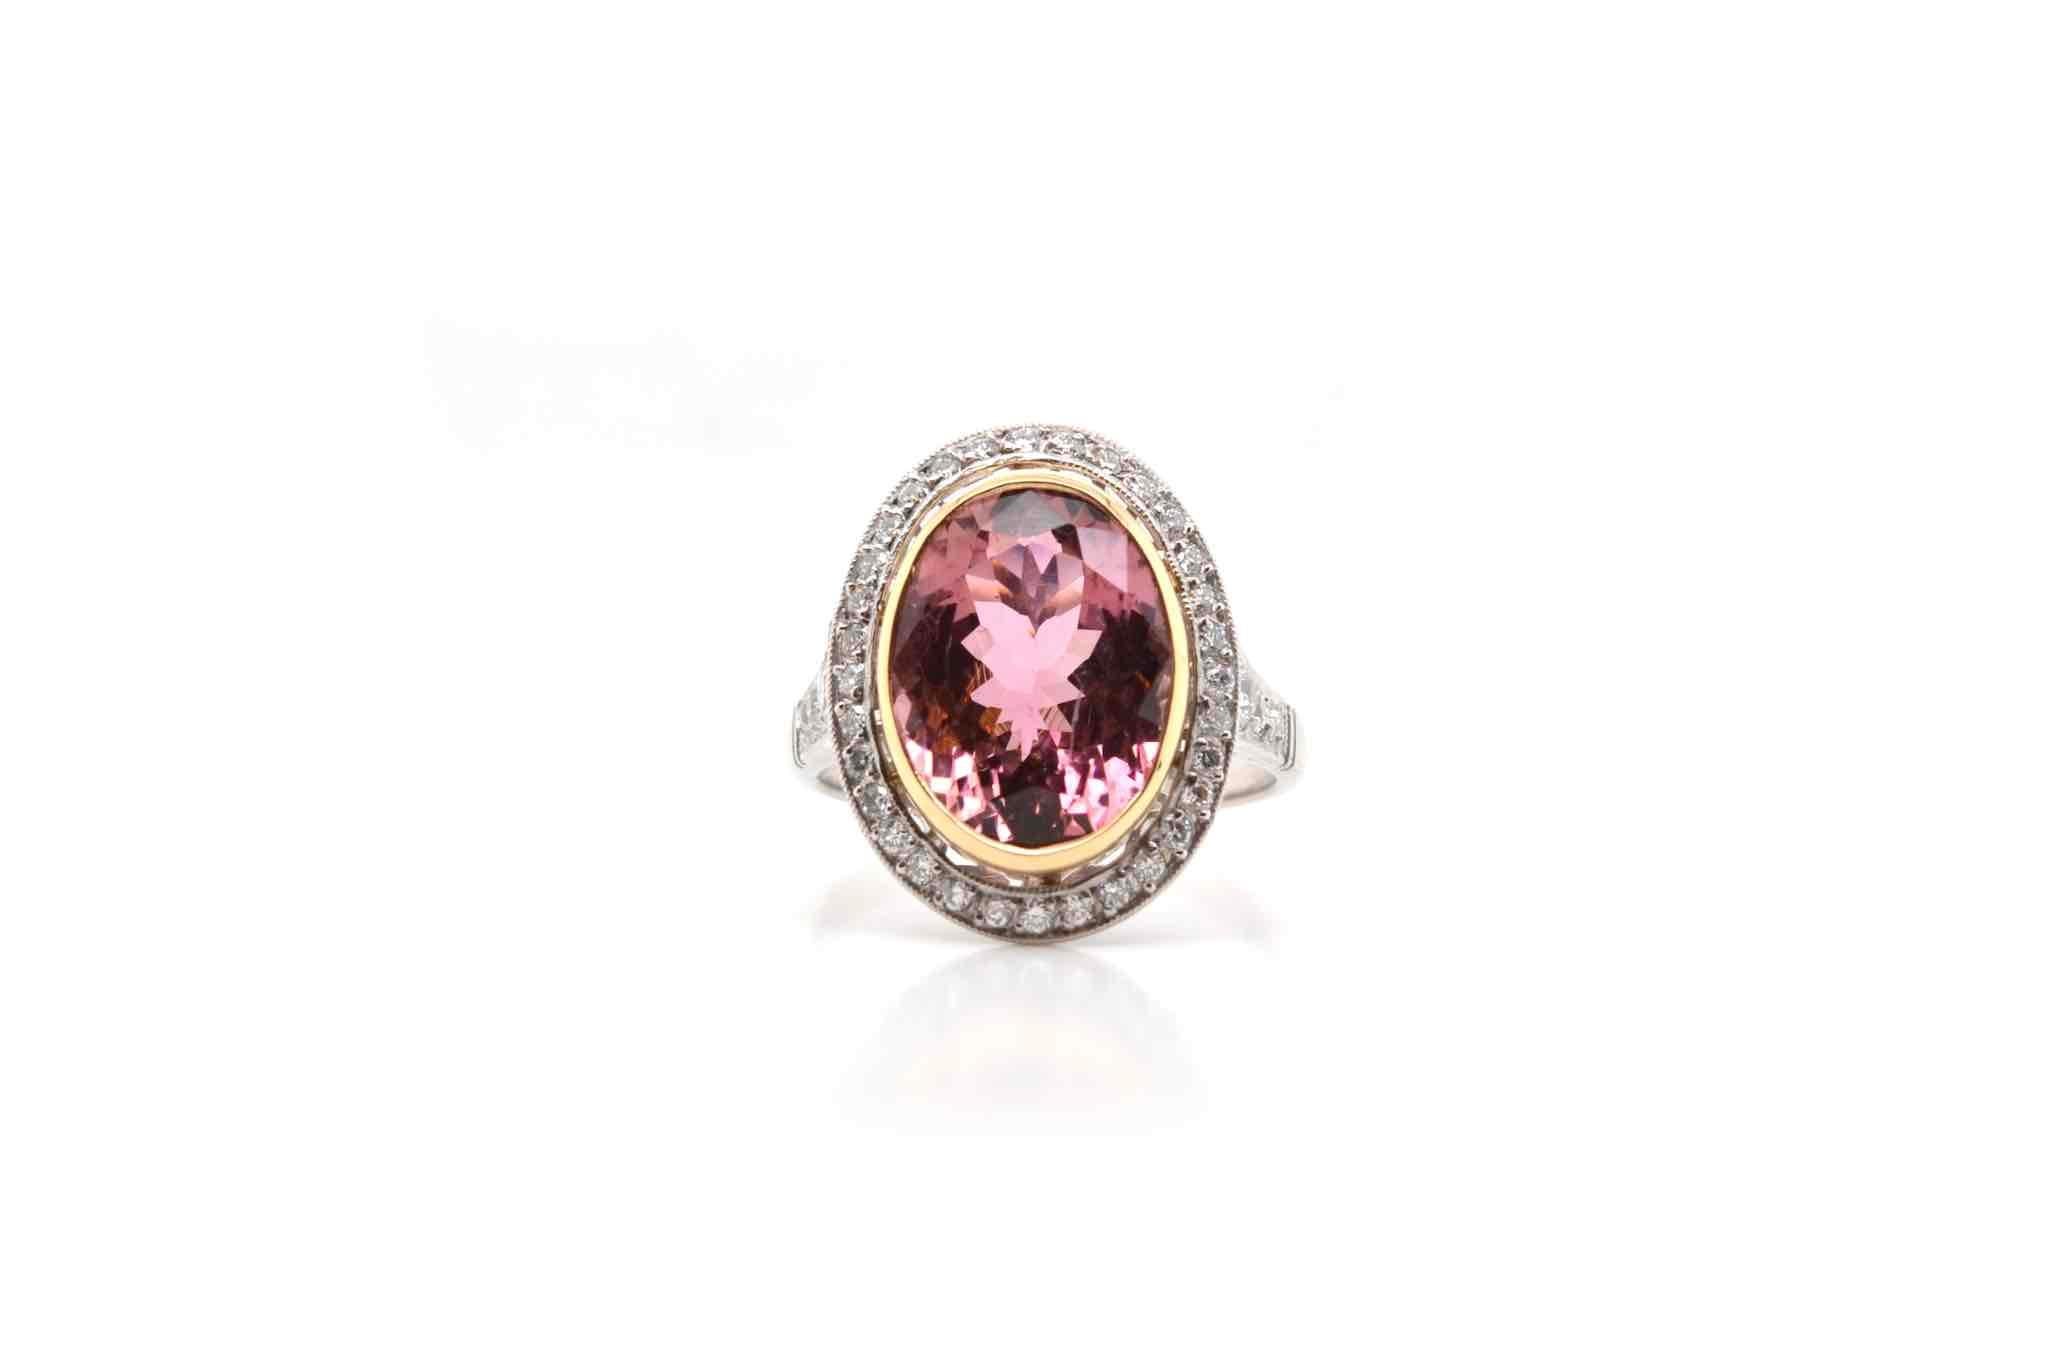 Stones: Pink tourmaline of 6.69 carats
and brilliant cut diamonds for a total weight of 0.35 carats.
Material: Platinum and 18k yellow gold
Dimensions: 19 mm length on finger
Weight: 7.2g
Size: 54 (free sizing)
Certificate
Ref. : 24454 / 24223